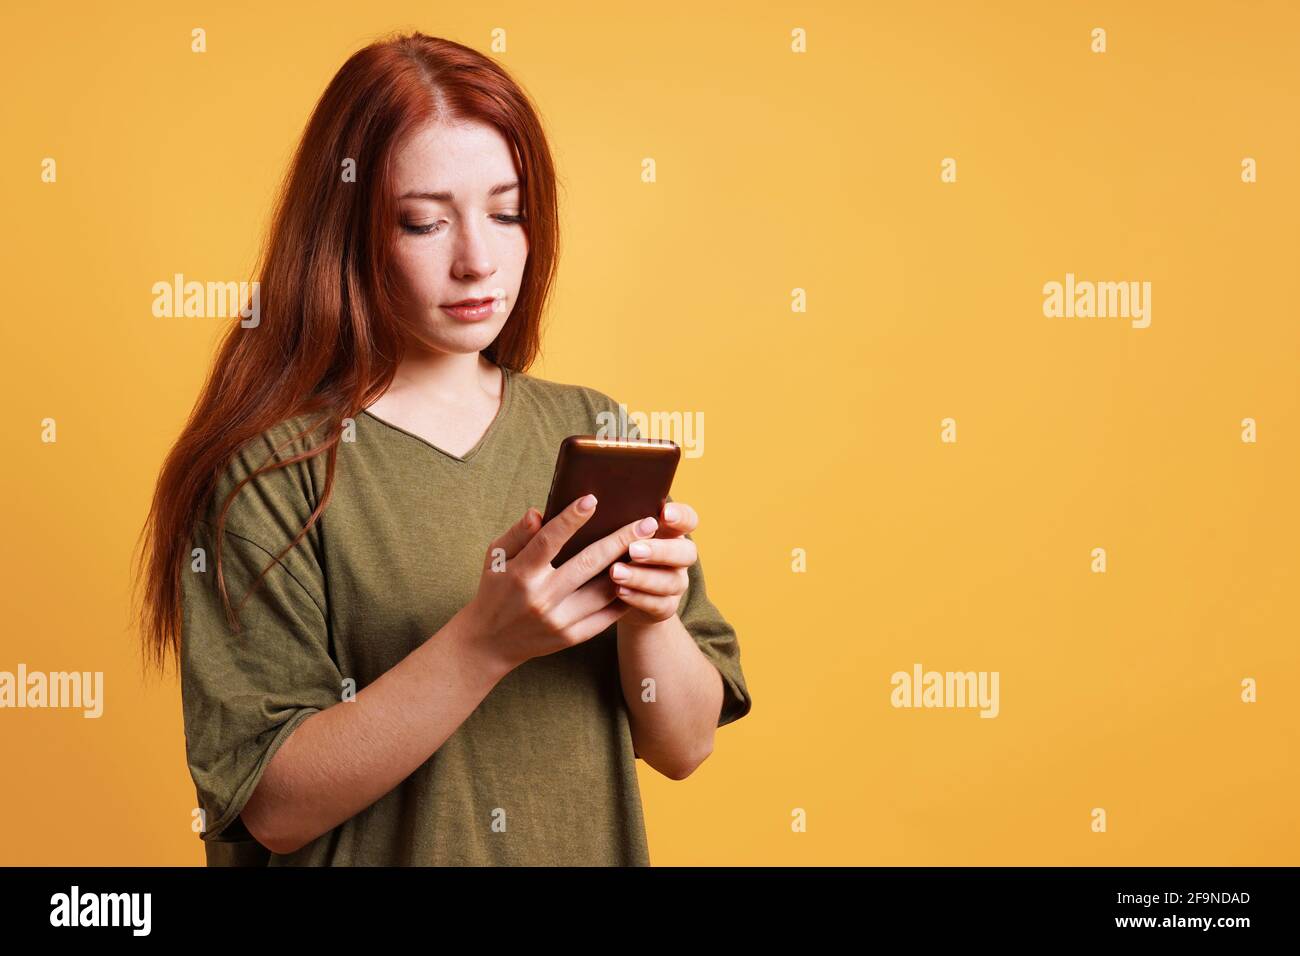 young woman reading text message on smartphone or mobile cell phone Stock Photo